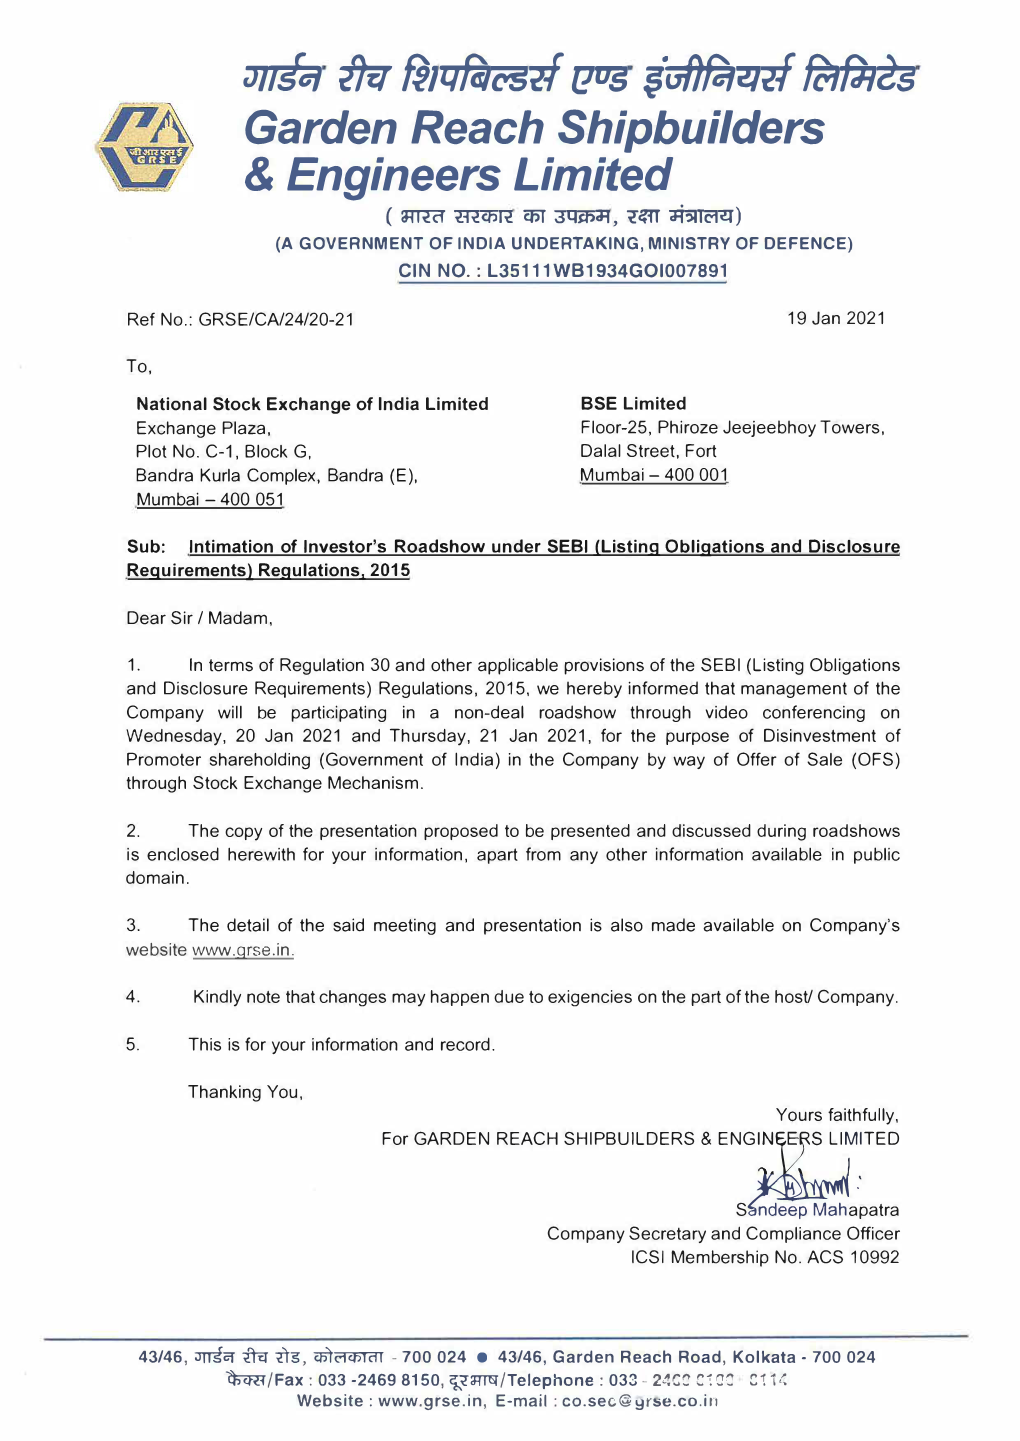 Intimation of Investor's Roadshow Under SEBI (Listing Obligations and Disclosure Requirements) Regulations, 2015